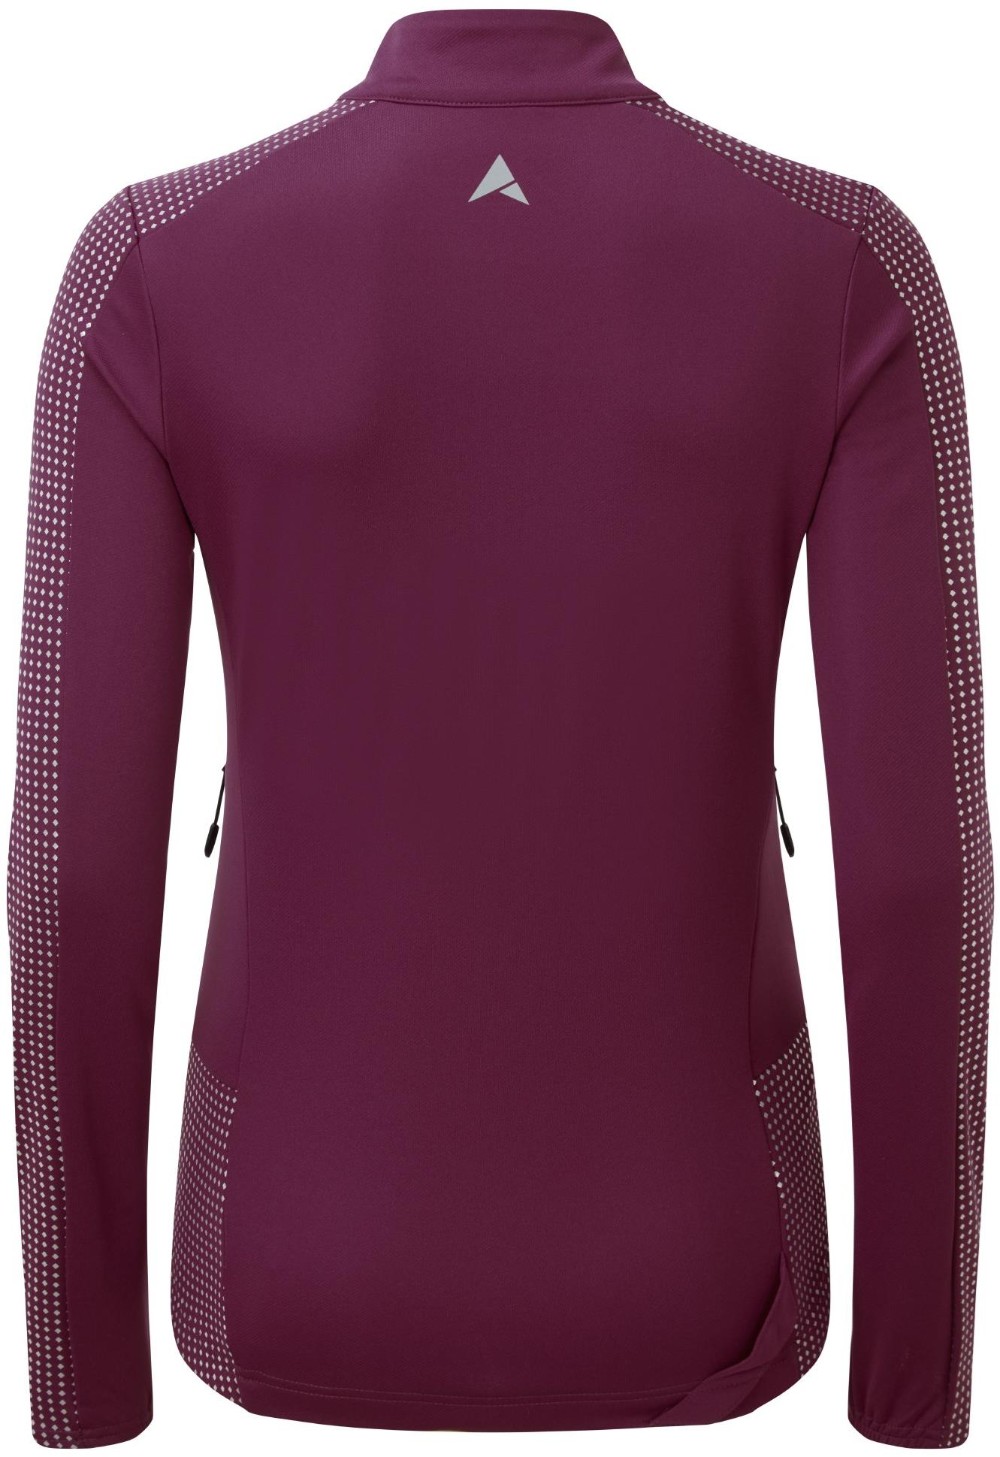 Nightvision Womens Long Sleeve Jersey image 2